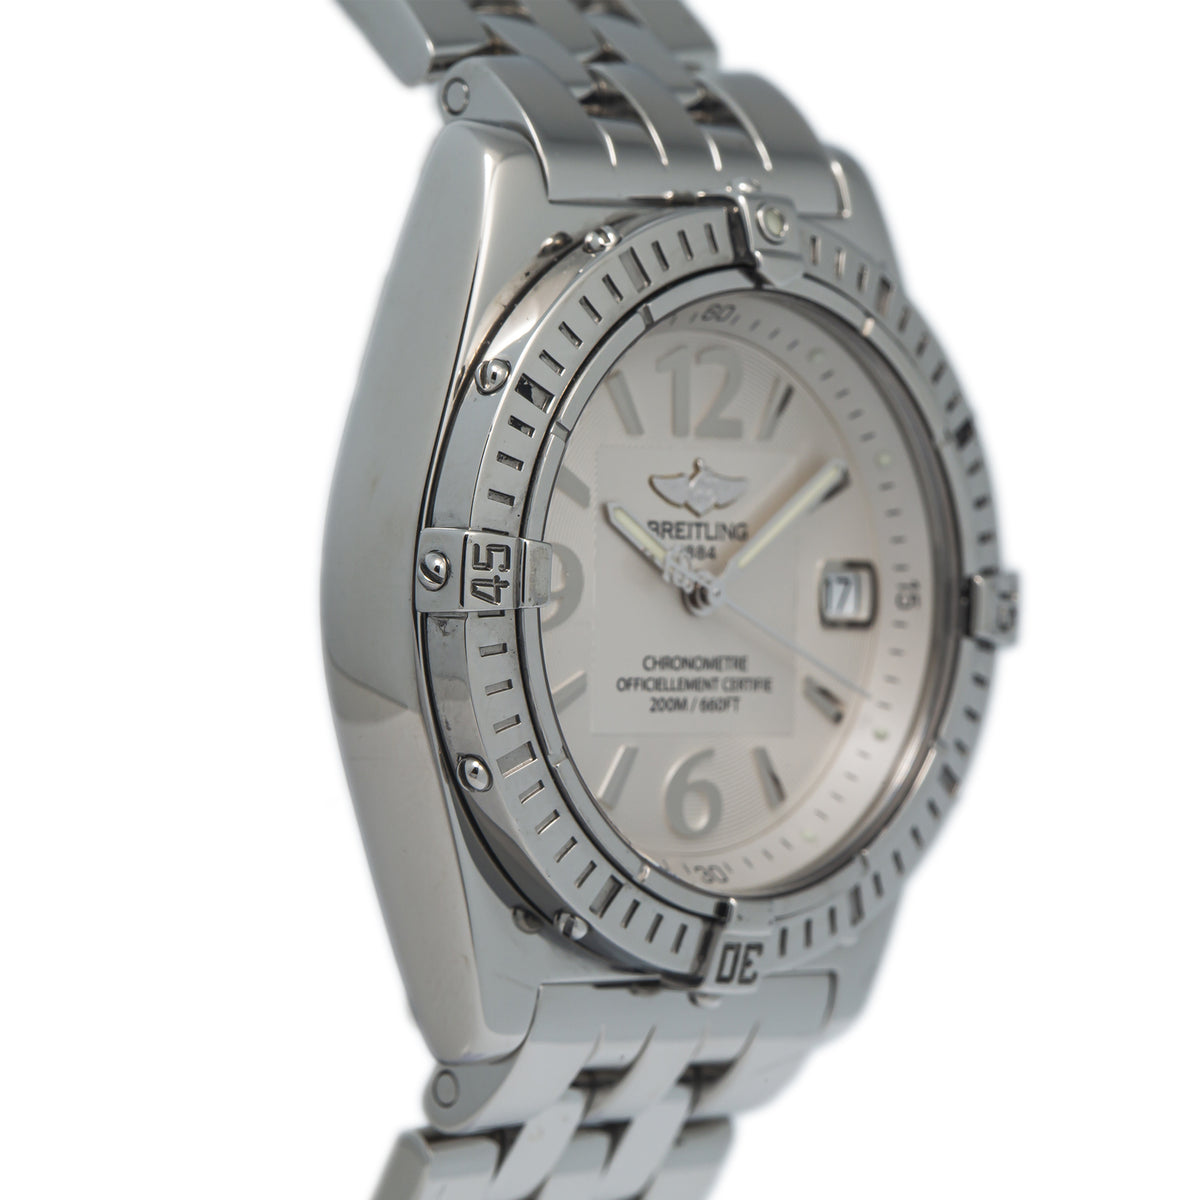 Breitling Chronometre A77346 Stainless Steel Automatic White Dial Watch 34mm